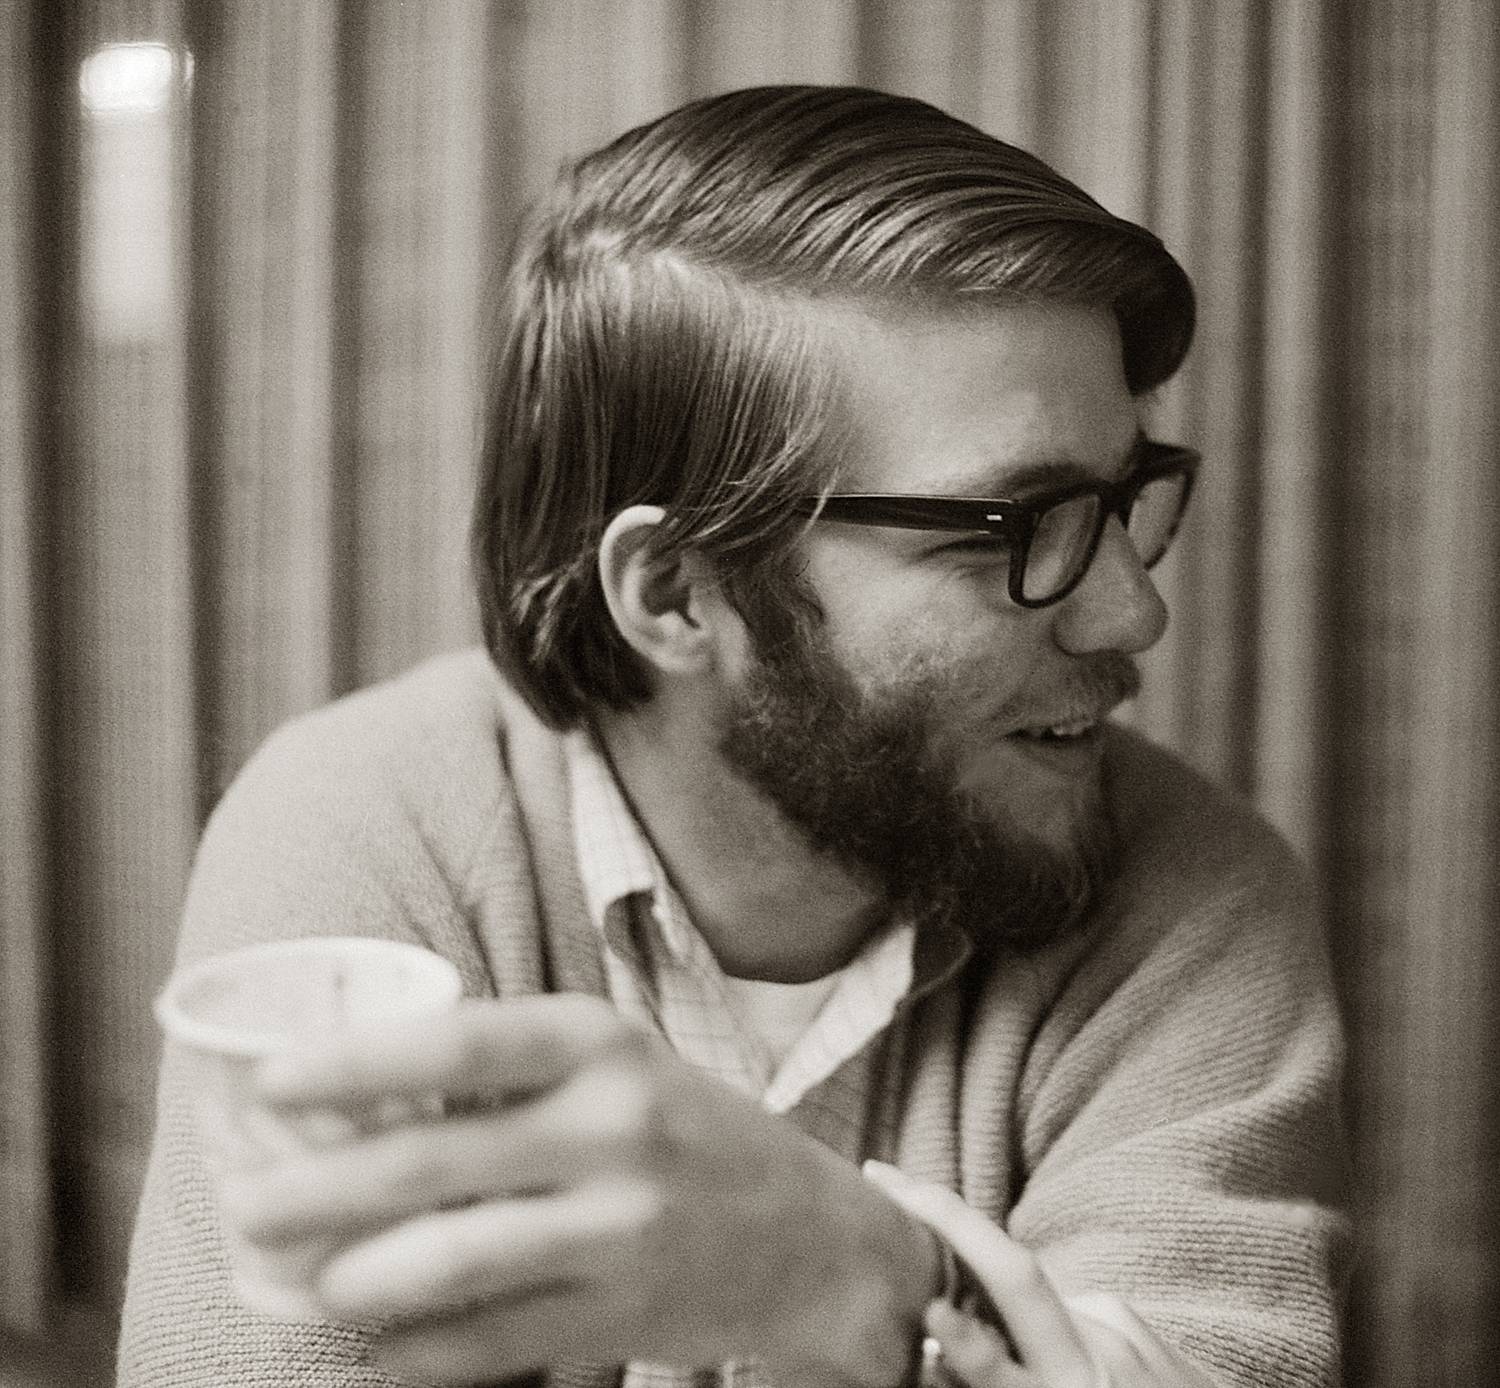 A young man with longer hear and glasses, dixie cup in hand, looking off camera to his left.